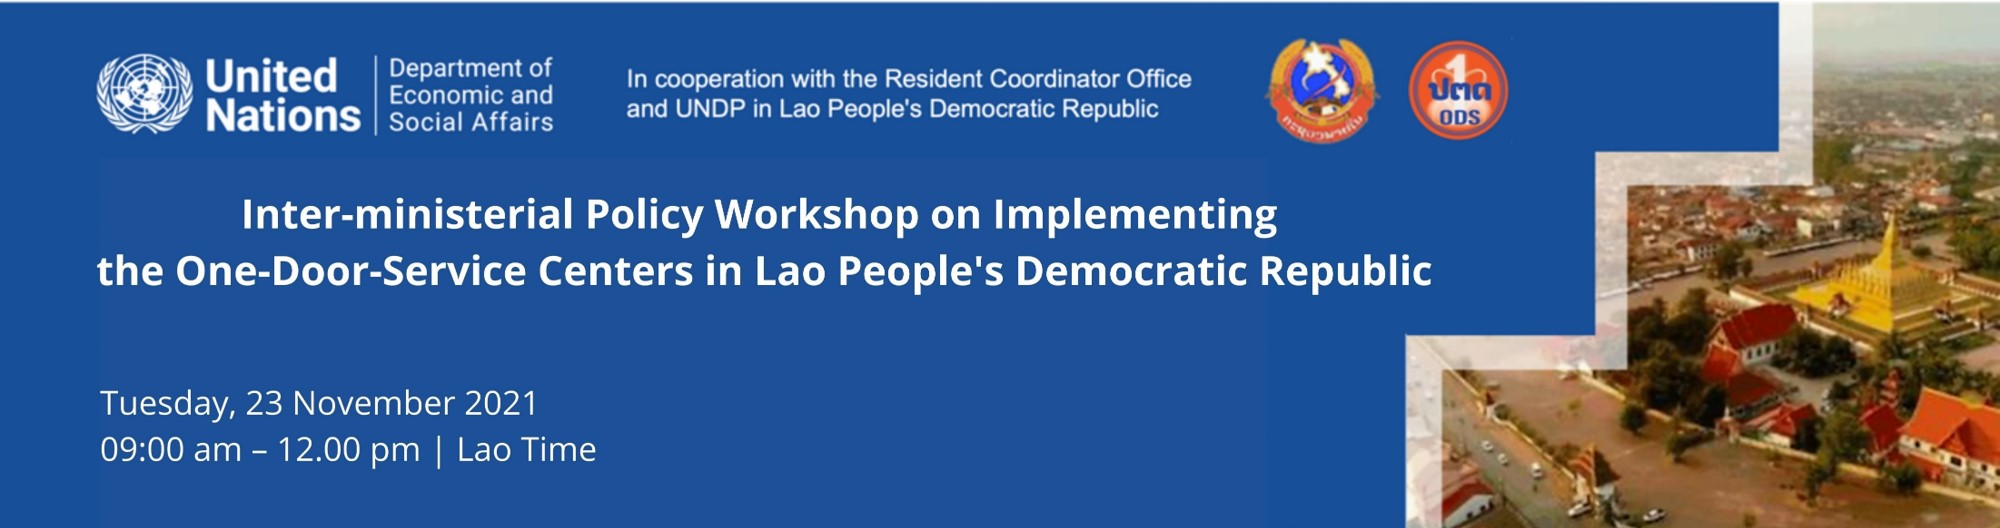 Inter-Ministerial Policy Workshop on Implementing the One-Door-Service Centers (ODSCs) in Lao